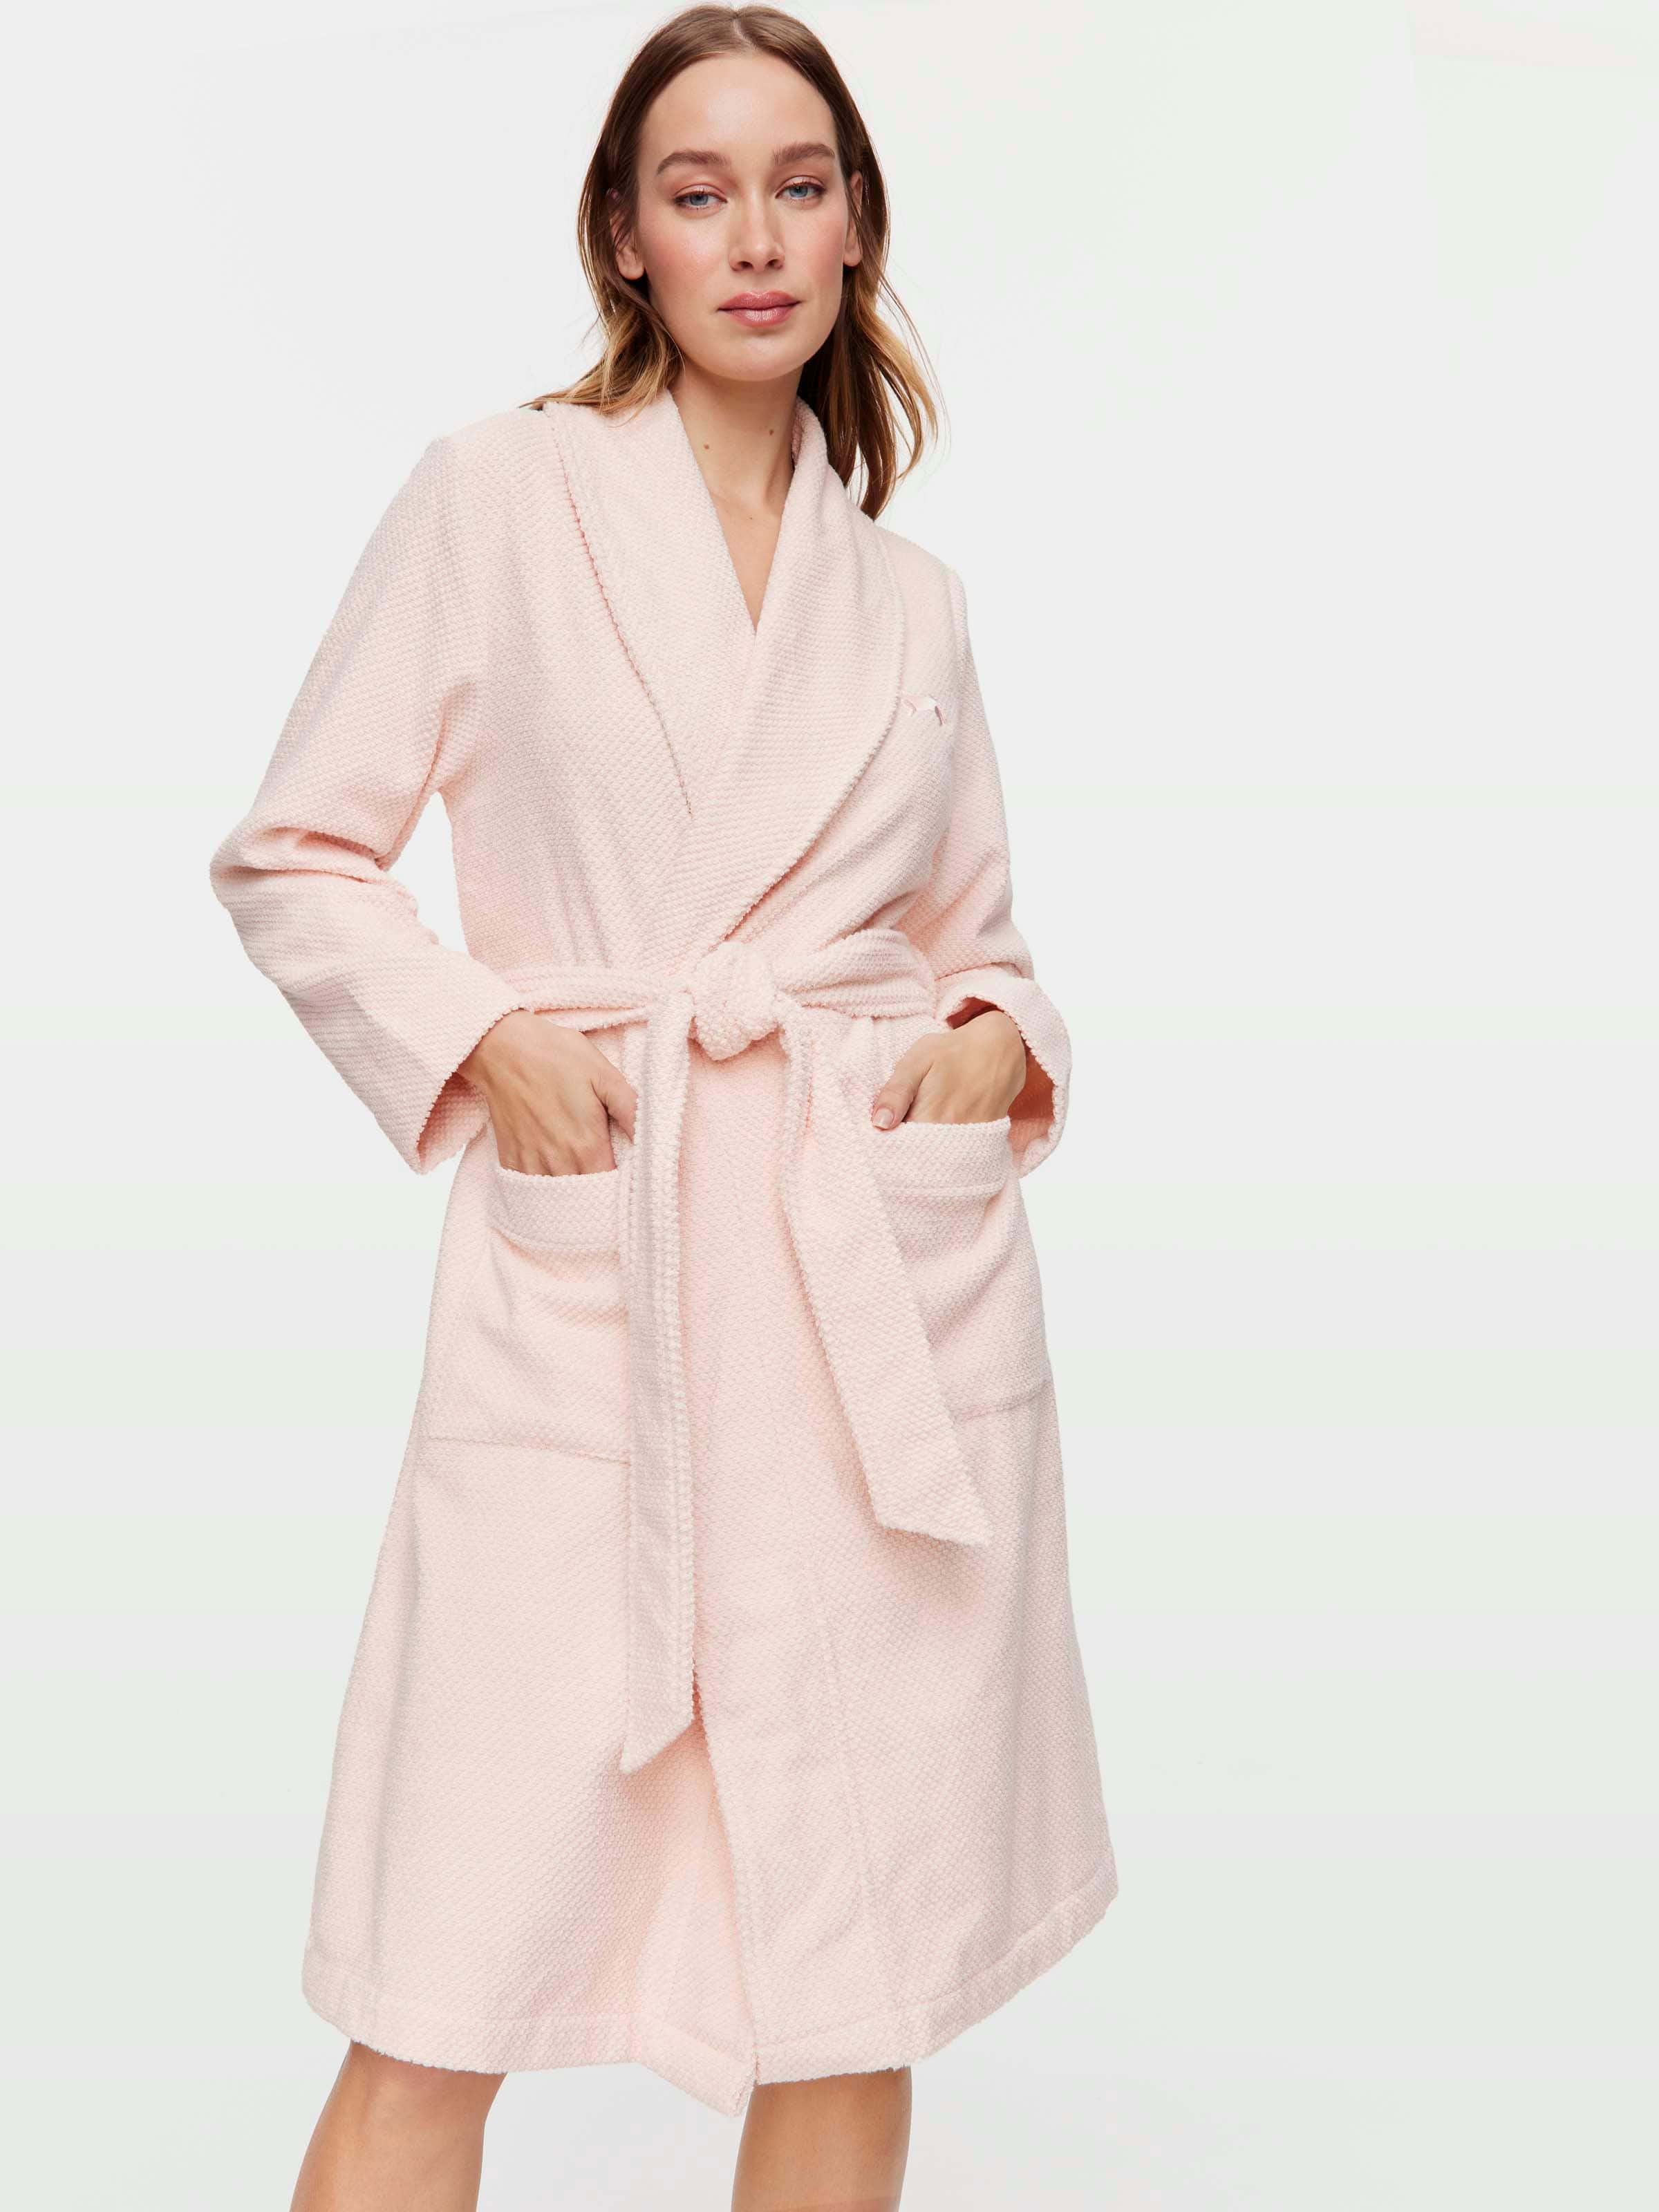 Womens Dressing Gowns  Robes  Sleepwear At Sussan